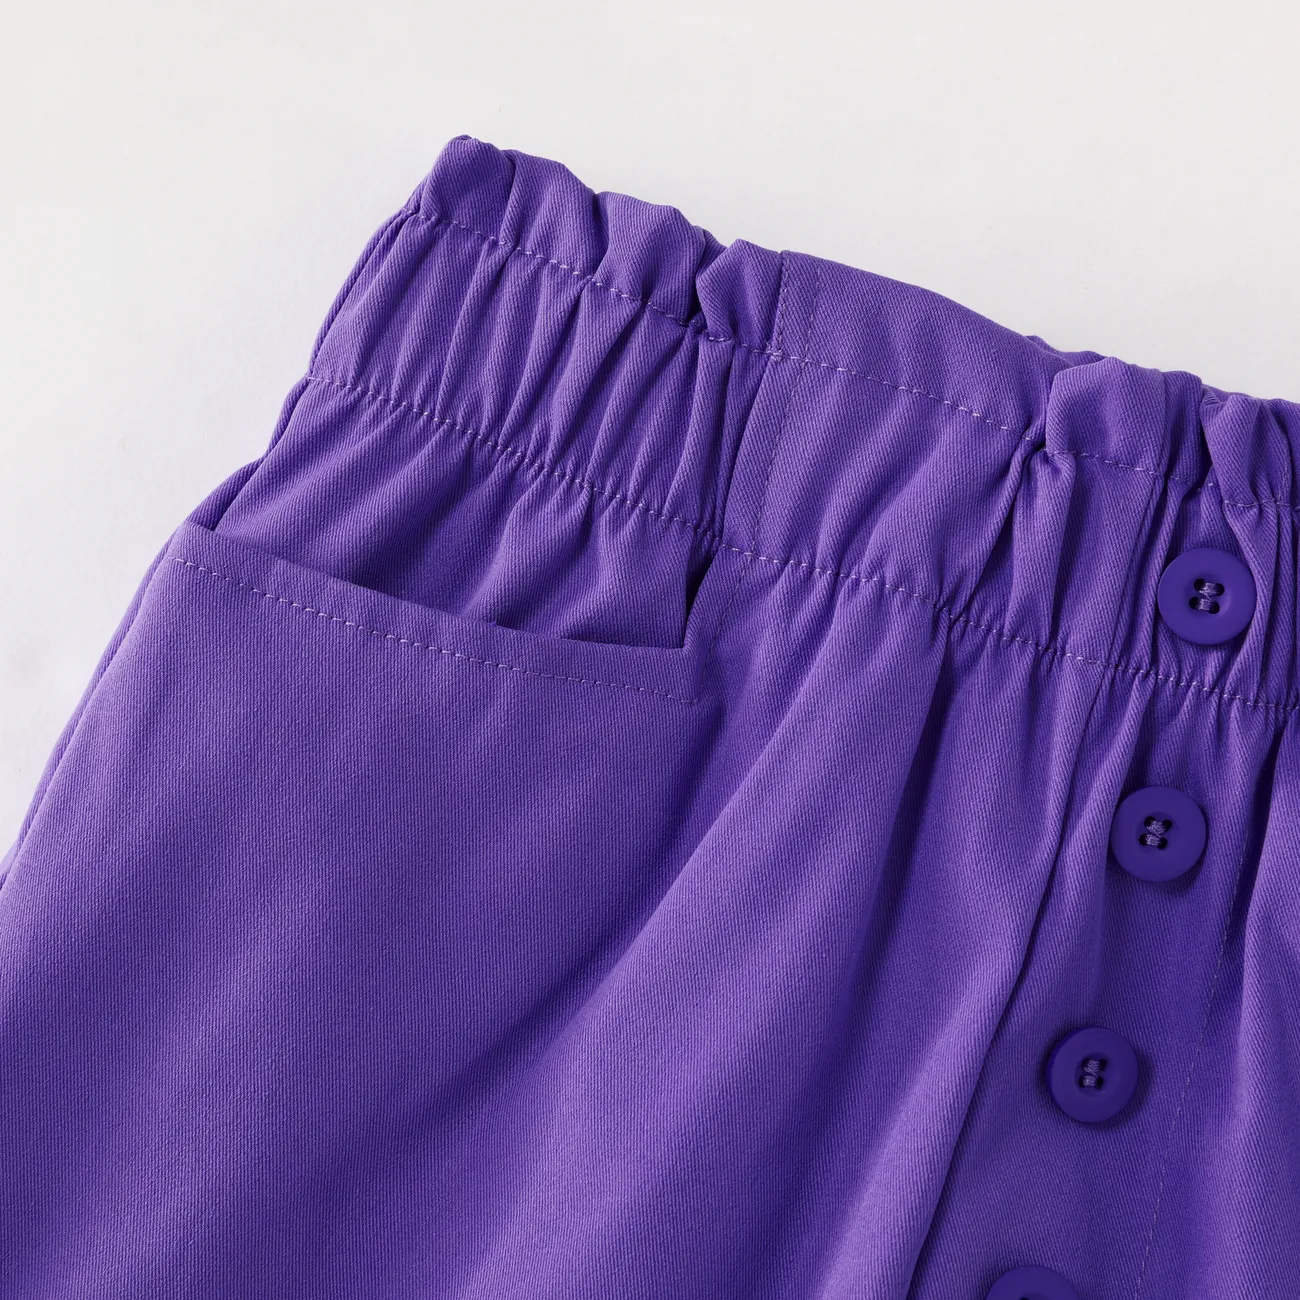 Cute High-Waisted Lace Shorts for Girls, Polyester Fabric, 1pc Set, Casual Style, Solid Color Purple big image 1